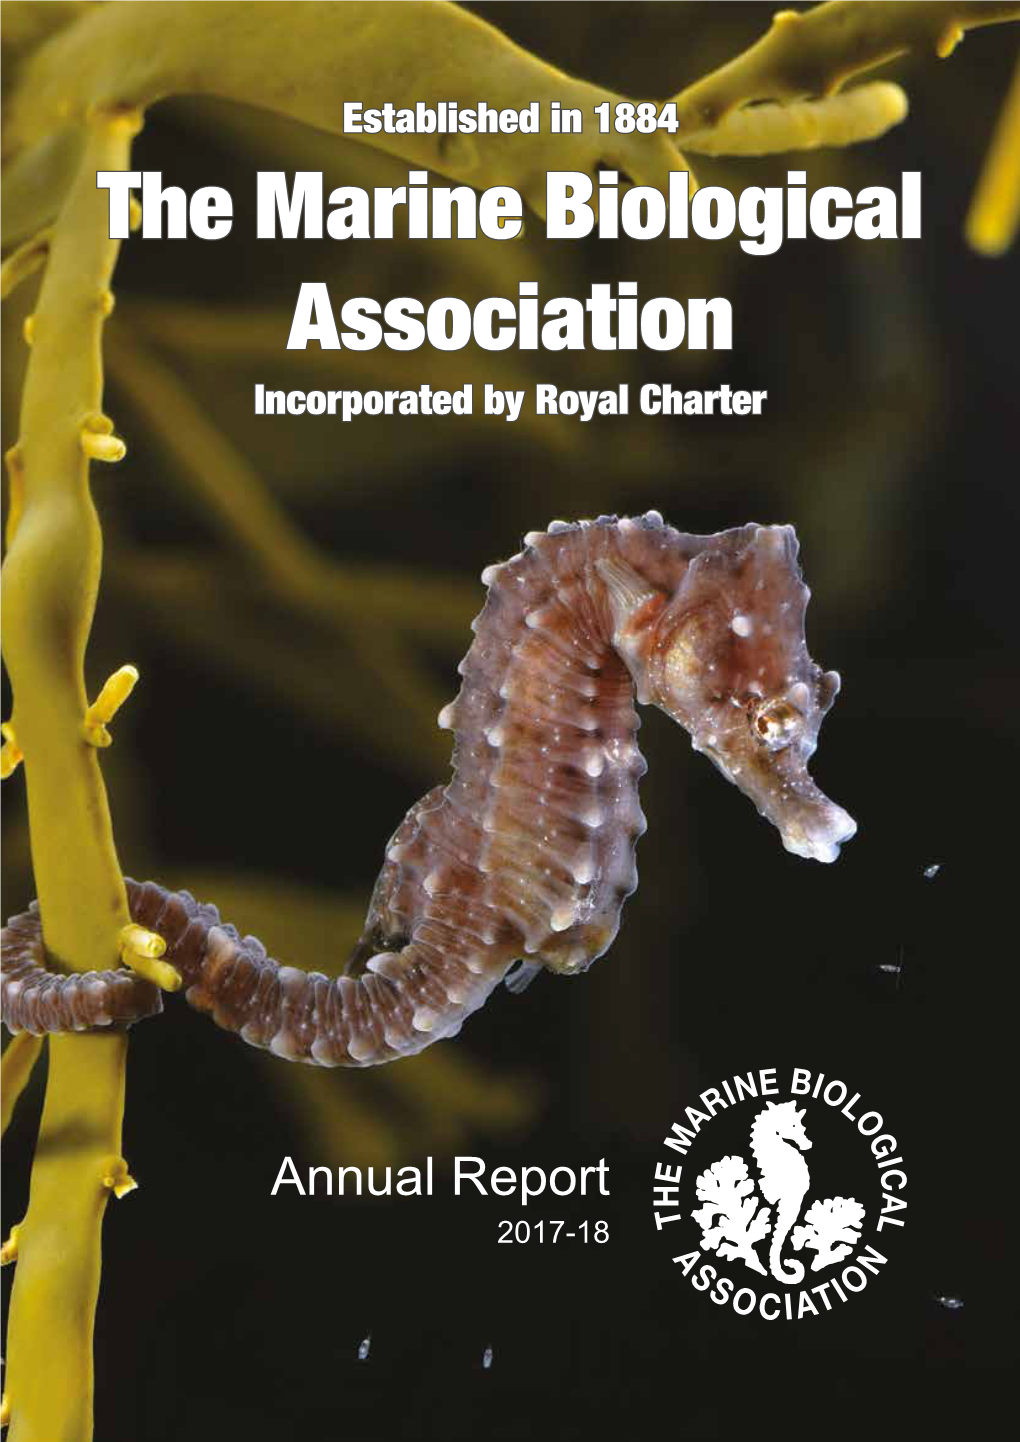 The Marine Biological Association Incorporated by Royal Charter